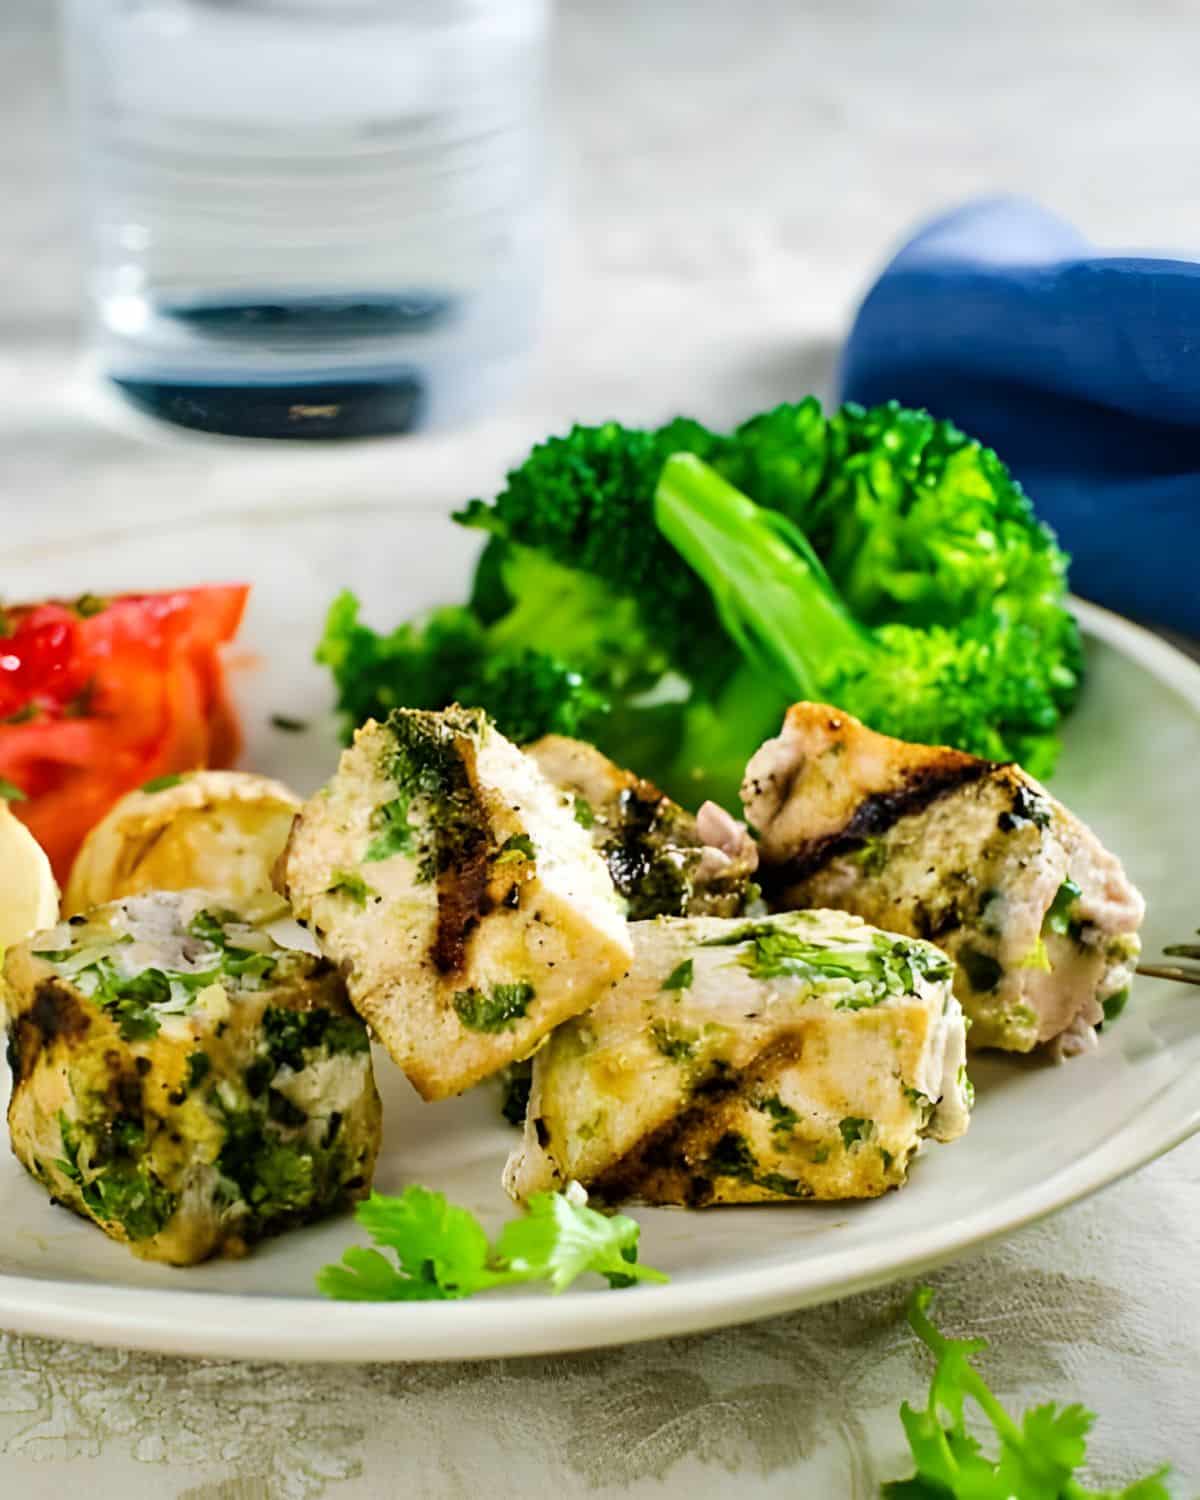 Grilled white fish with herbs with broccoli and tomatoes on a plate.